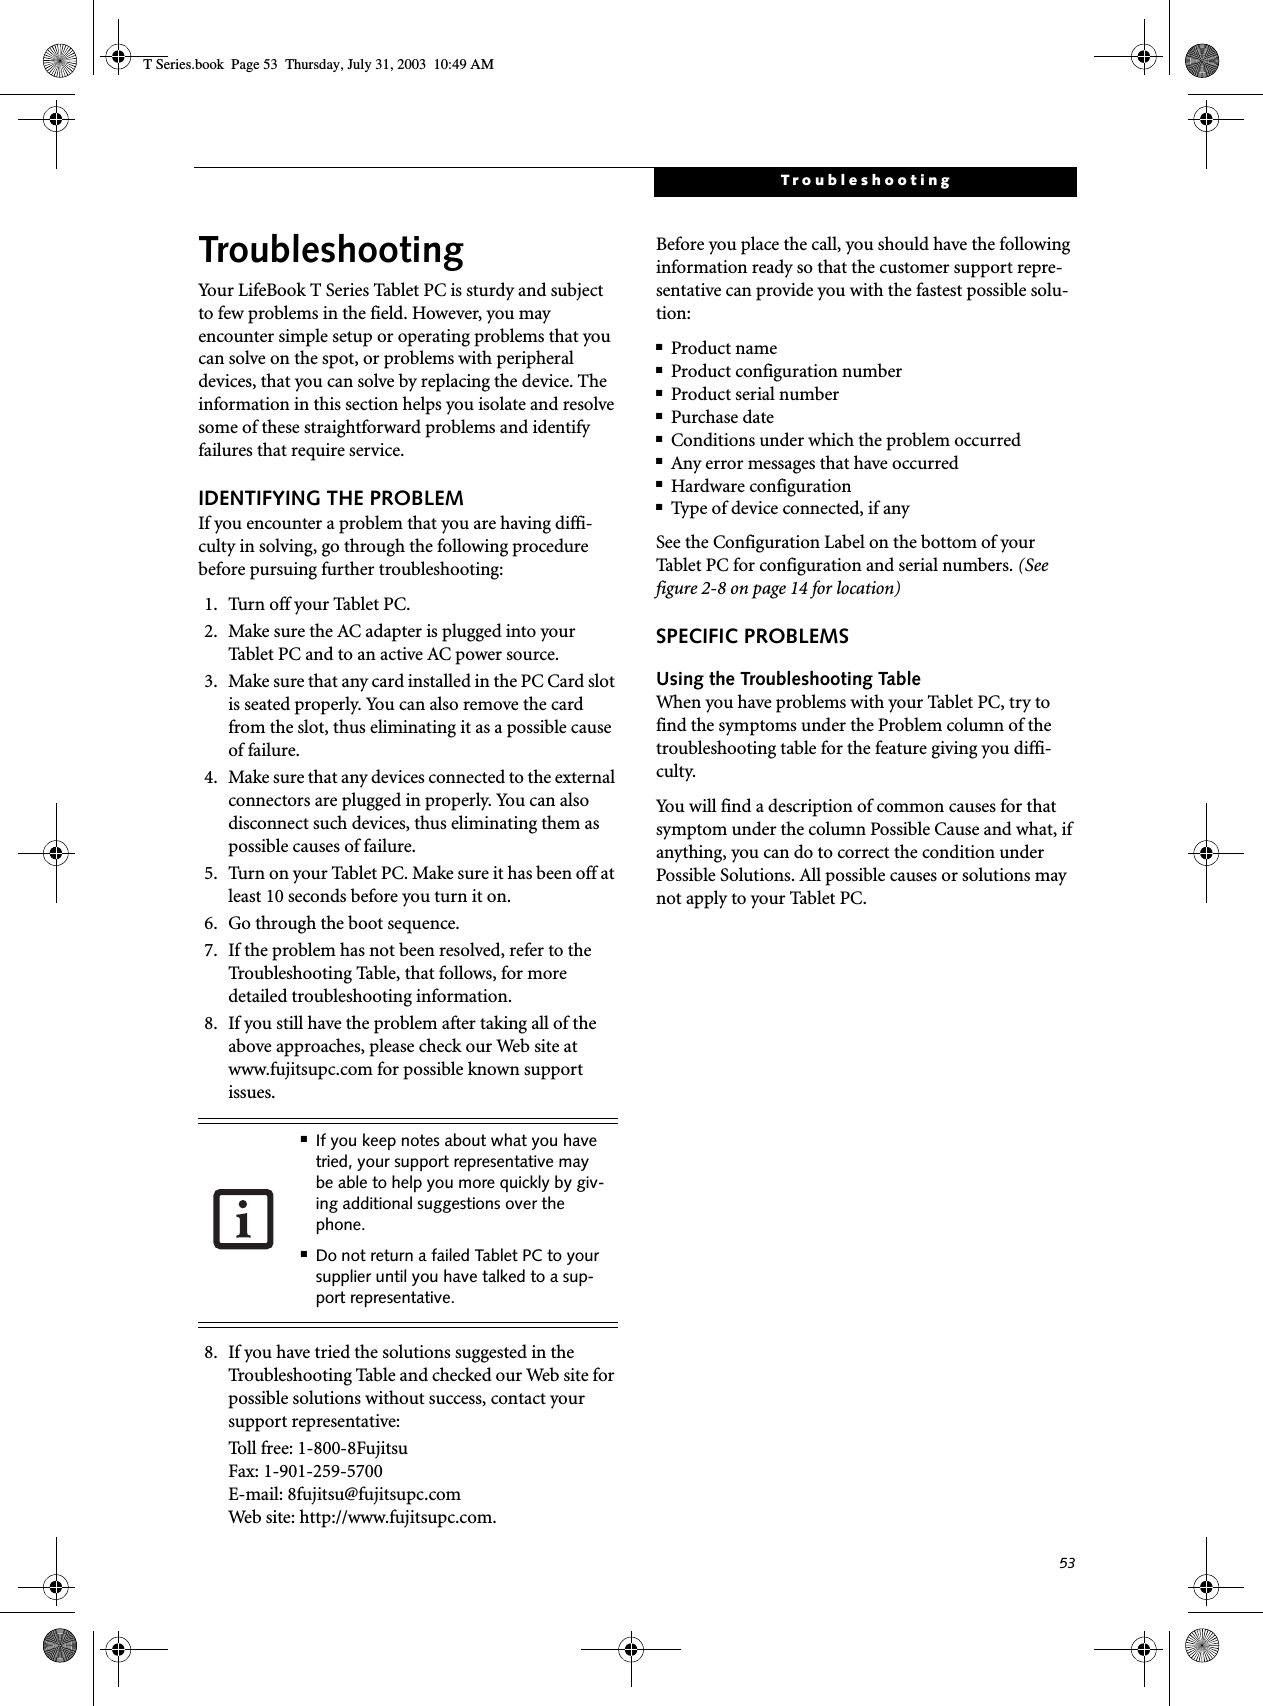 53TroubleshootingTroubleshootingYour LifeBook T Series Tablet PC is sturdy and subject to few problems in the field. However, you may encounter simple setup or operating problems that you can solve on the spot, or problems with peripheral devices, that you can solve by replacing the device. The information in this section helps you isolate and resolve some of these straightforward problems and identify failures that require service.IDENTIFYING THE PROBLEMIf you encounter a problem that you are having diffi-culty in solving, go through the following procedure before pursuing further troubleshooting:1. Tur n off your Tabl e t  PC.2. Make sure the AC adapter is plugged into your Tablet PC and to an active AC power source.3. Make sure that any card installed in the PC Card slot is seated properly. You can also remove the card from the slot, thus eliminating it as a possible cause of failure.4. Make sure that any devices connected to the external connectors are plugged in properly. You can also disconnect such devices, thus eliminating them as possible causes of failure.5. Turn on your Tablet PC. Make sure it has been off at least 10 seconds before you turn it on.6. Go through the boot sequence.7. If the problem has not been resolved, refer to the Troubleshooting Table, that follows, for more detailed troubleshooting information.8. If you still have the problem after taking all of the above approaches, please check our Web site at www.fujitsupc.com for possible known support issues. 8. If you have tried the solutions suggested in the Troubleshooting Table and checked our Web site for possible solutions without success, contact your support representative: Toll free: 1-800-8Fujitsu Fax: 1-901-259-5700 E-mail: 8fujitsu@fujitsupc.com Web site: http://www.fujitsupc.com.Before you place the call, you should have the following information ready so that the customer support repre-sentative can provide you with the fastest possible solu-tion:■Product name■Product configuration number■Product serial number■Purchase date■Conditions under which the problem occurred■Any error messages that have occurred■Hardware configuration■Type of device connected, if anySee the Configuration Label on the bottom of yourTablet PC for configuration and serial numbers. (See figure 2-8 on page 14 for location)SPECIFIC PROBLEMSUsing the Troubleshooting TableWhen you have problems with your Tablet PC, try to find the symptoms under the Problem column of the troubleshooting table for the feature giving you diffi-culty. You will find a description of common causes for that symptom under the column Possible Cause and what, if anything, you can do to correct the condition under Possible Solutions. All possible causes or solutions may not apply to your Tablet PC.■If you keep notes about what you have tried, your support representative may be able to help you more quickly by giv-ing additional suggestions over the phone.■Do not return a failed Tablet PC to your supplier until you have talked to a sup-port representative.T Series.book  Page 53  Thursday, July 31, 2003  10:49 AM